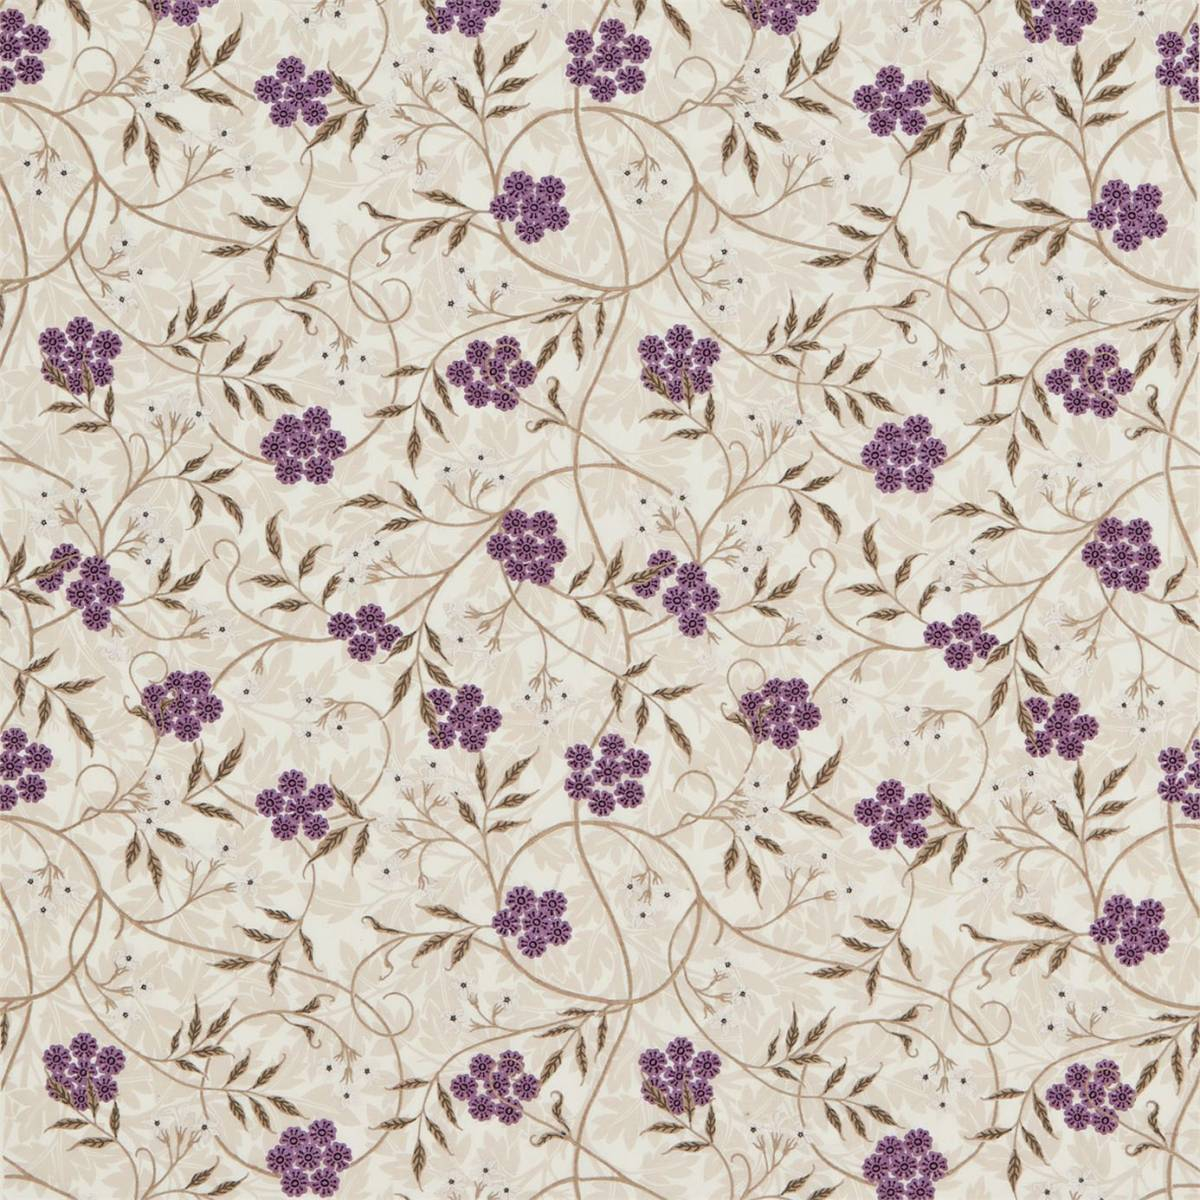 William Morris Embroidery Patterns Curtains In William Morris Co Jasmine Embroidery Fabric Aubergineolive Product Code 234554